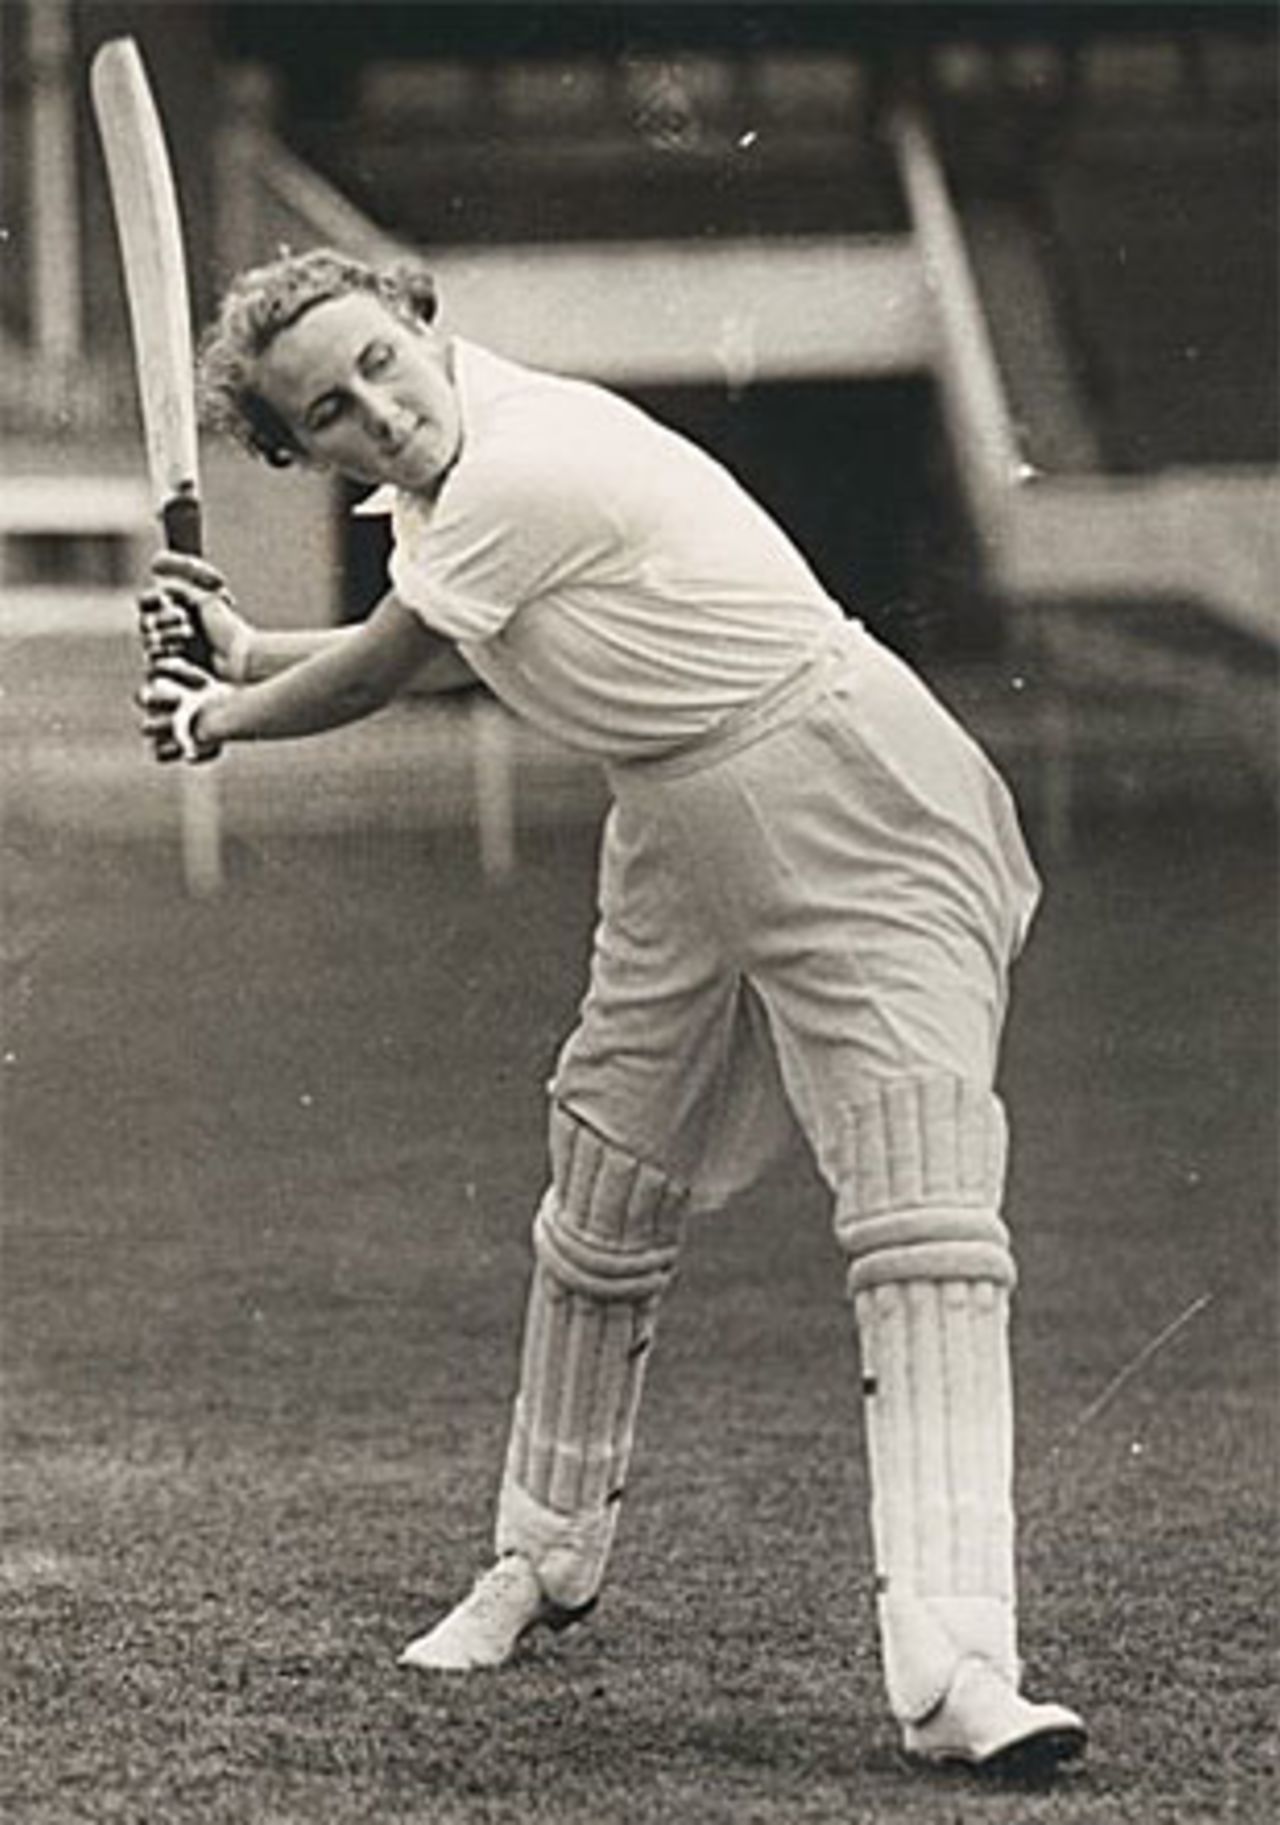 Molly Hide during England's tour of Australia and New Zealand in 1934-35, National Library of Australia